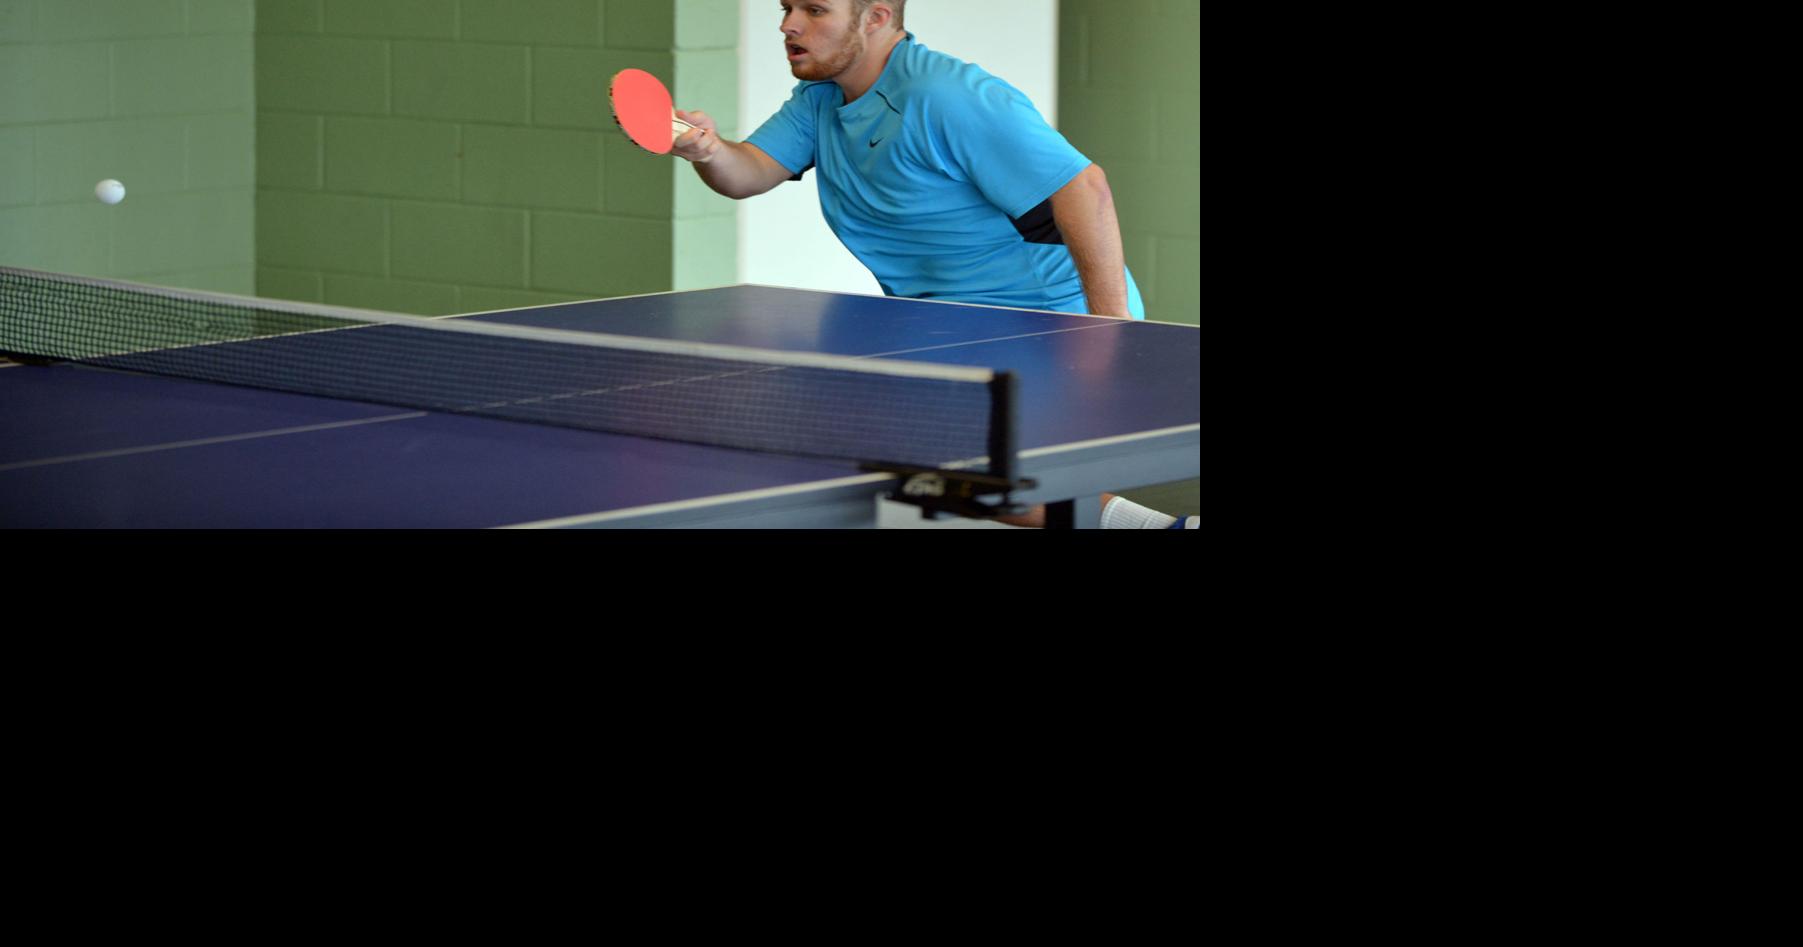 Table tennis competition at Morgan Center